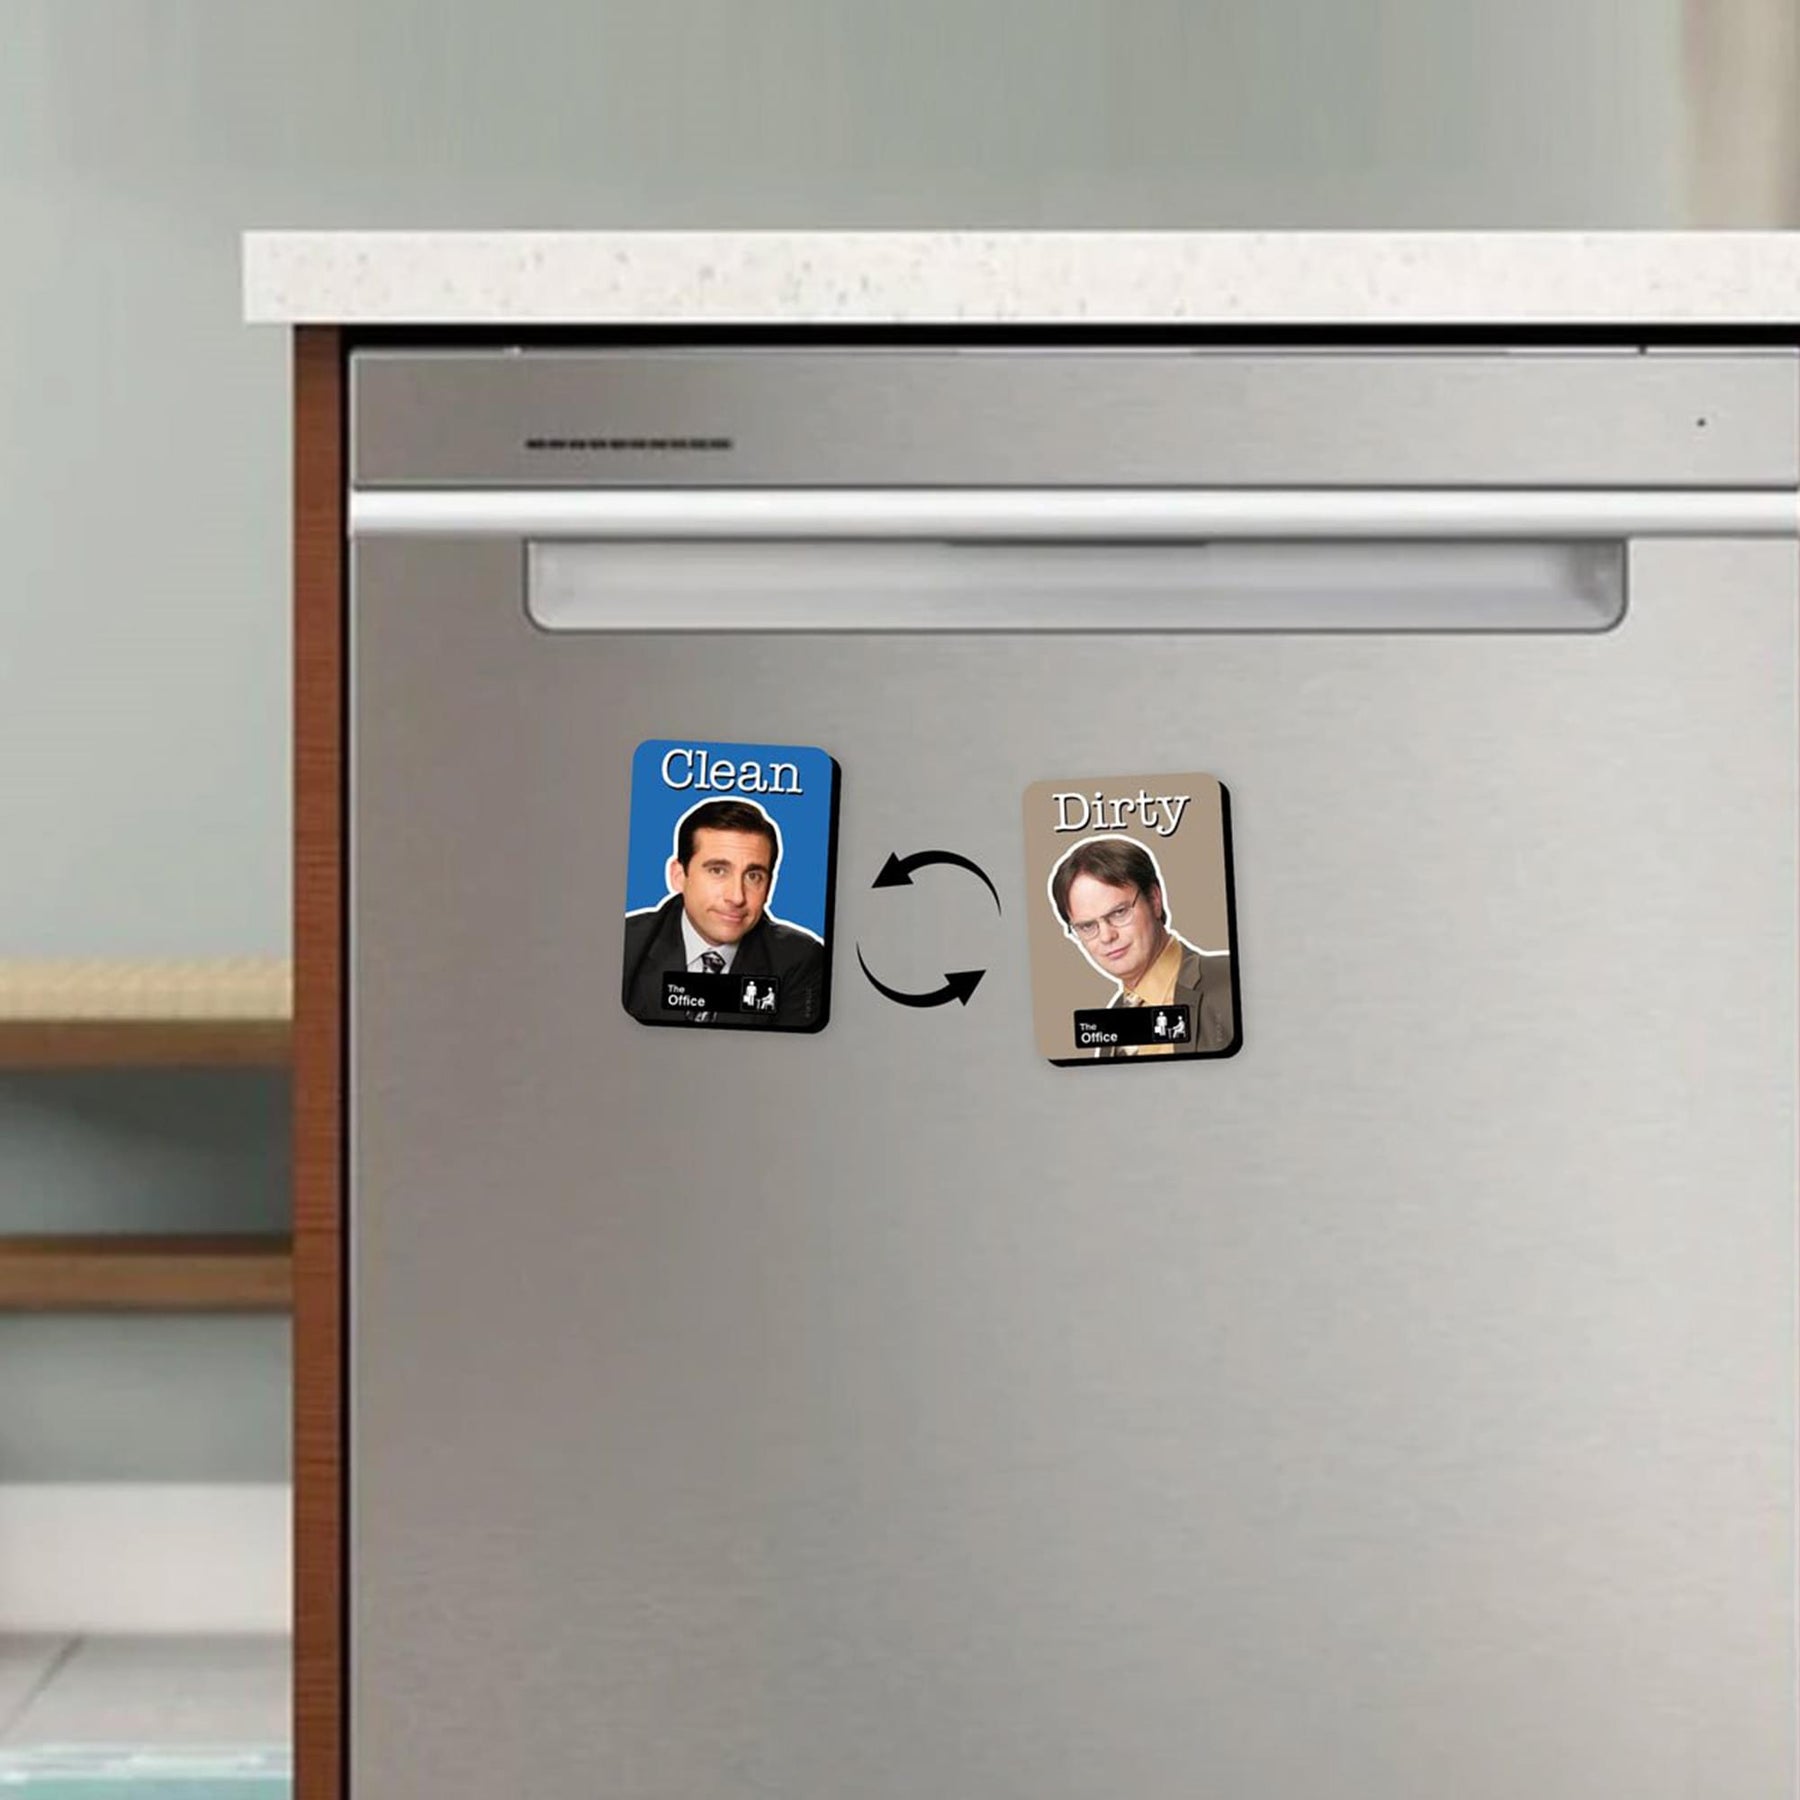 The Office Dishwasher Magnet